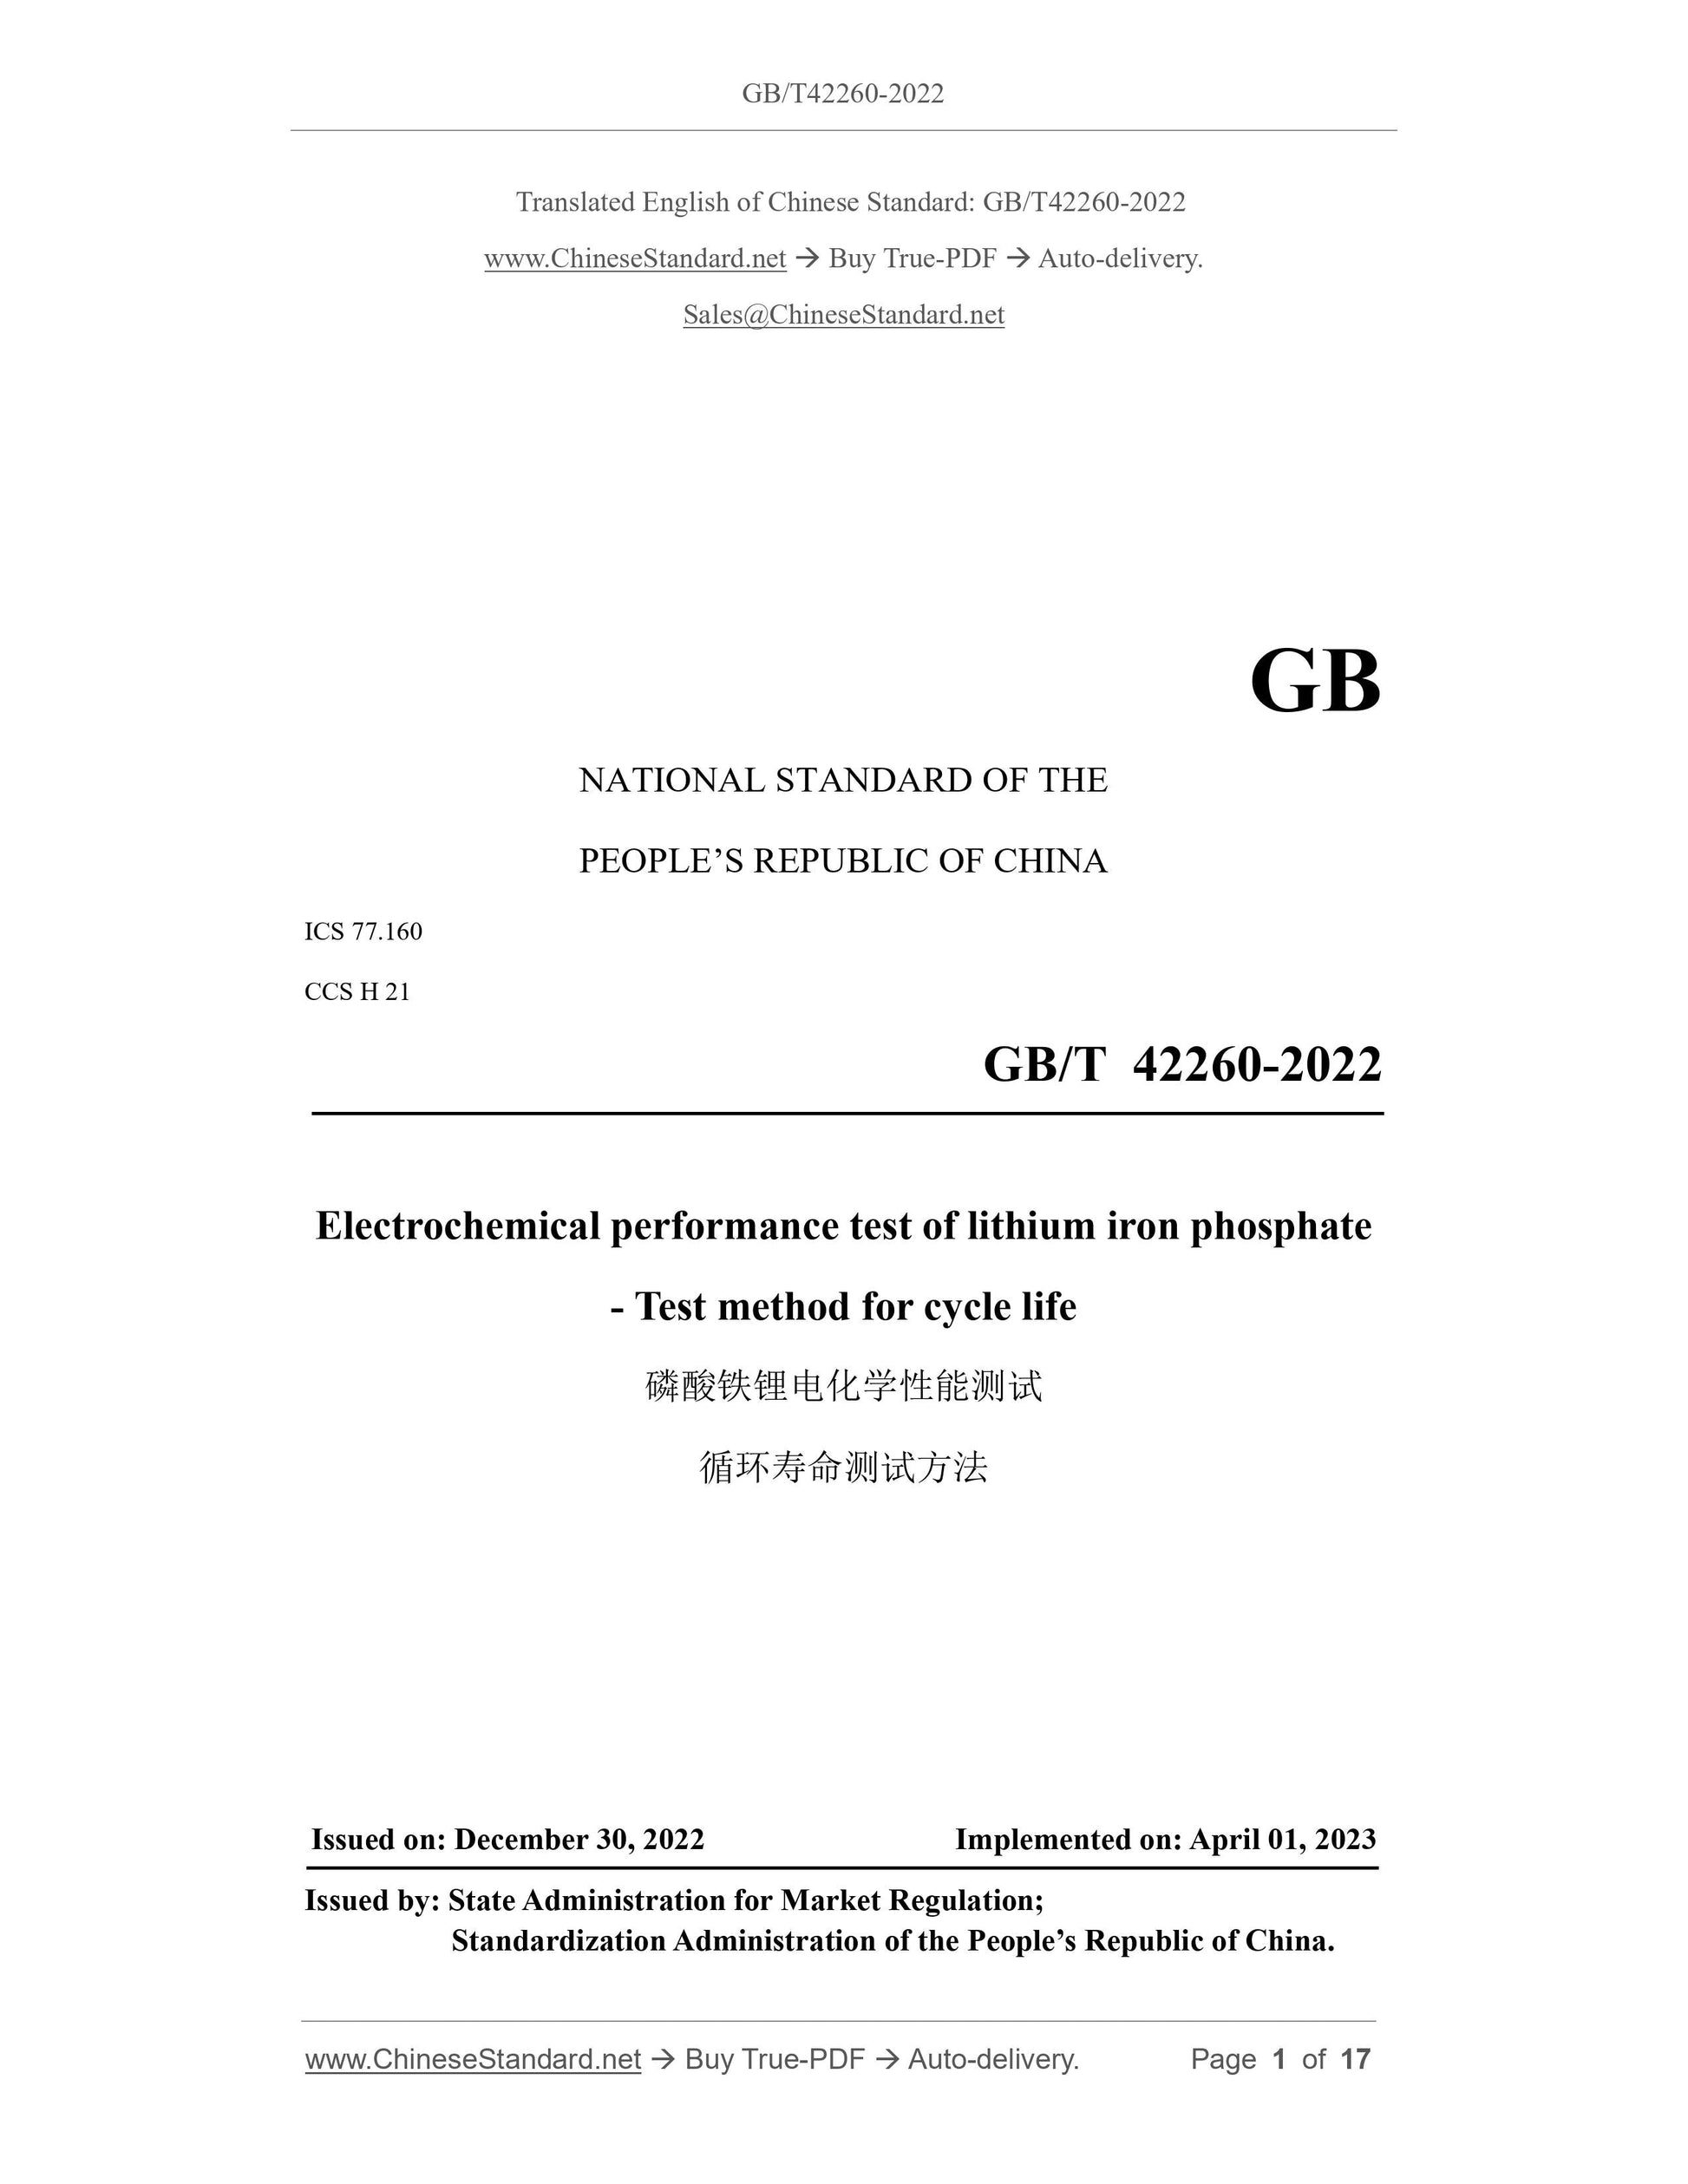 GB/T 42260-2022 Page 1